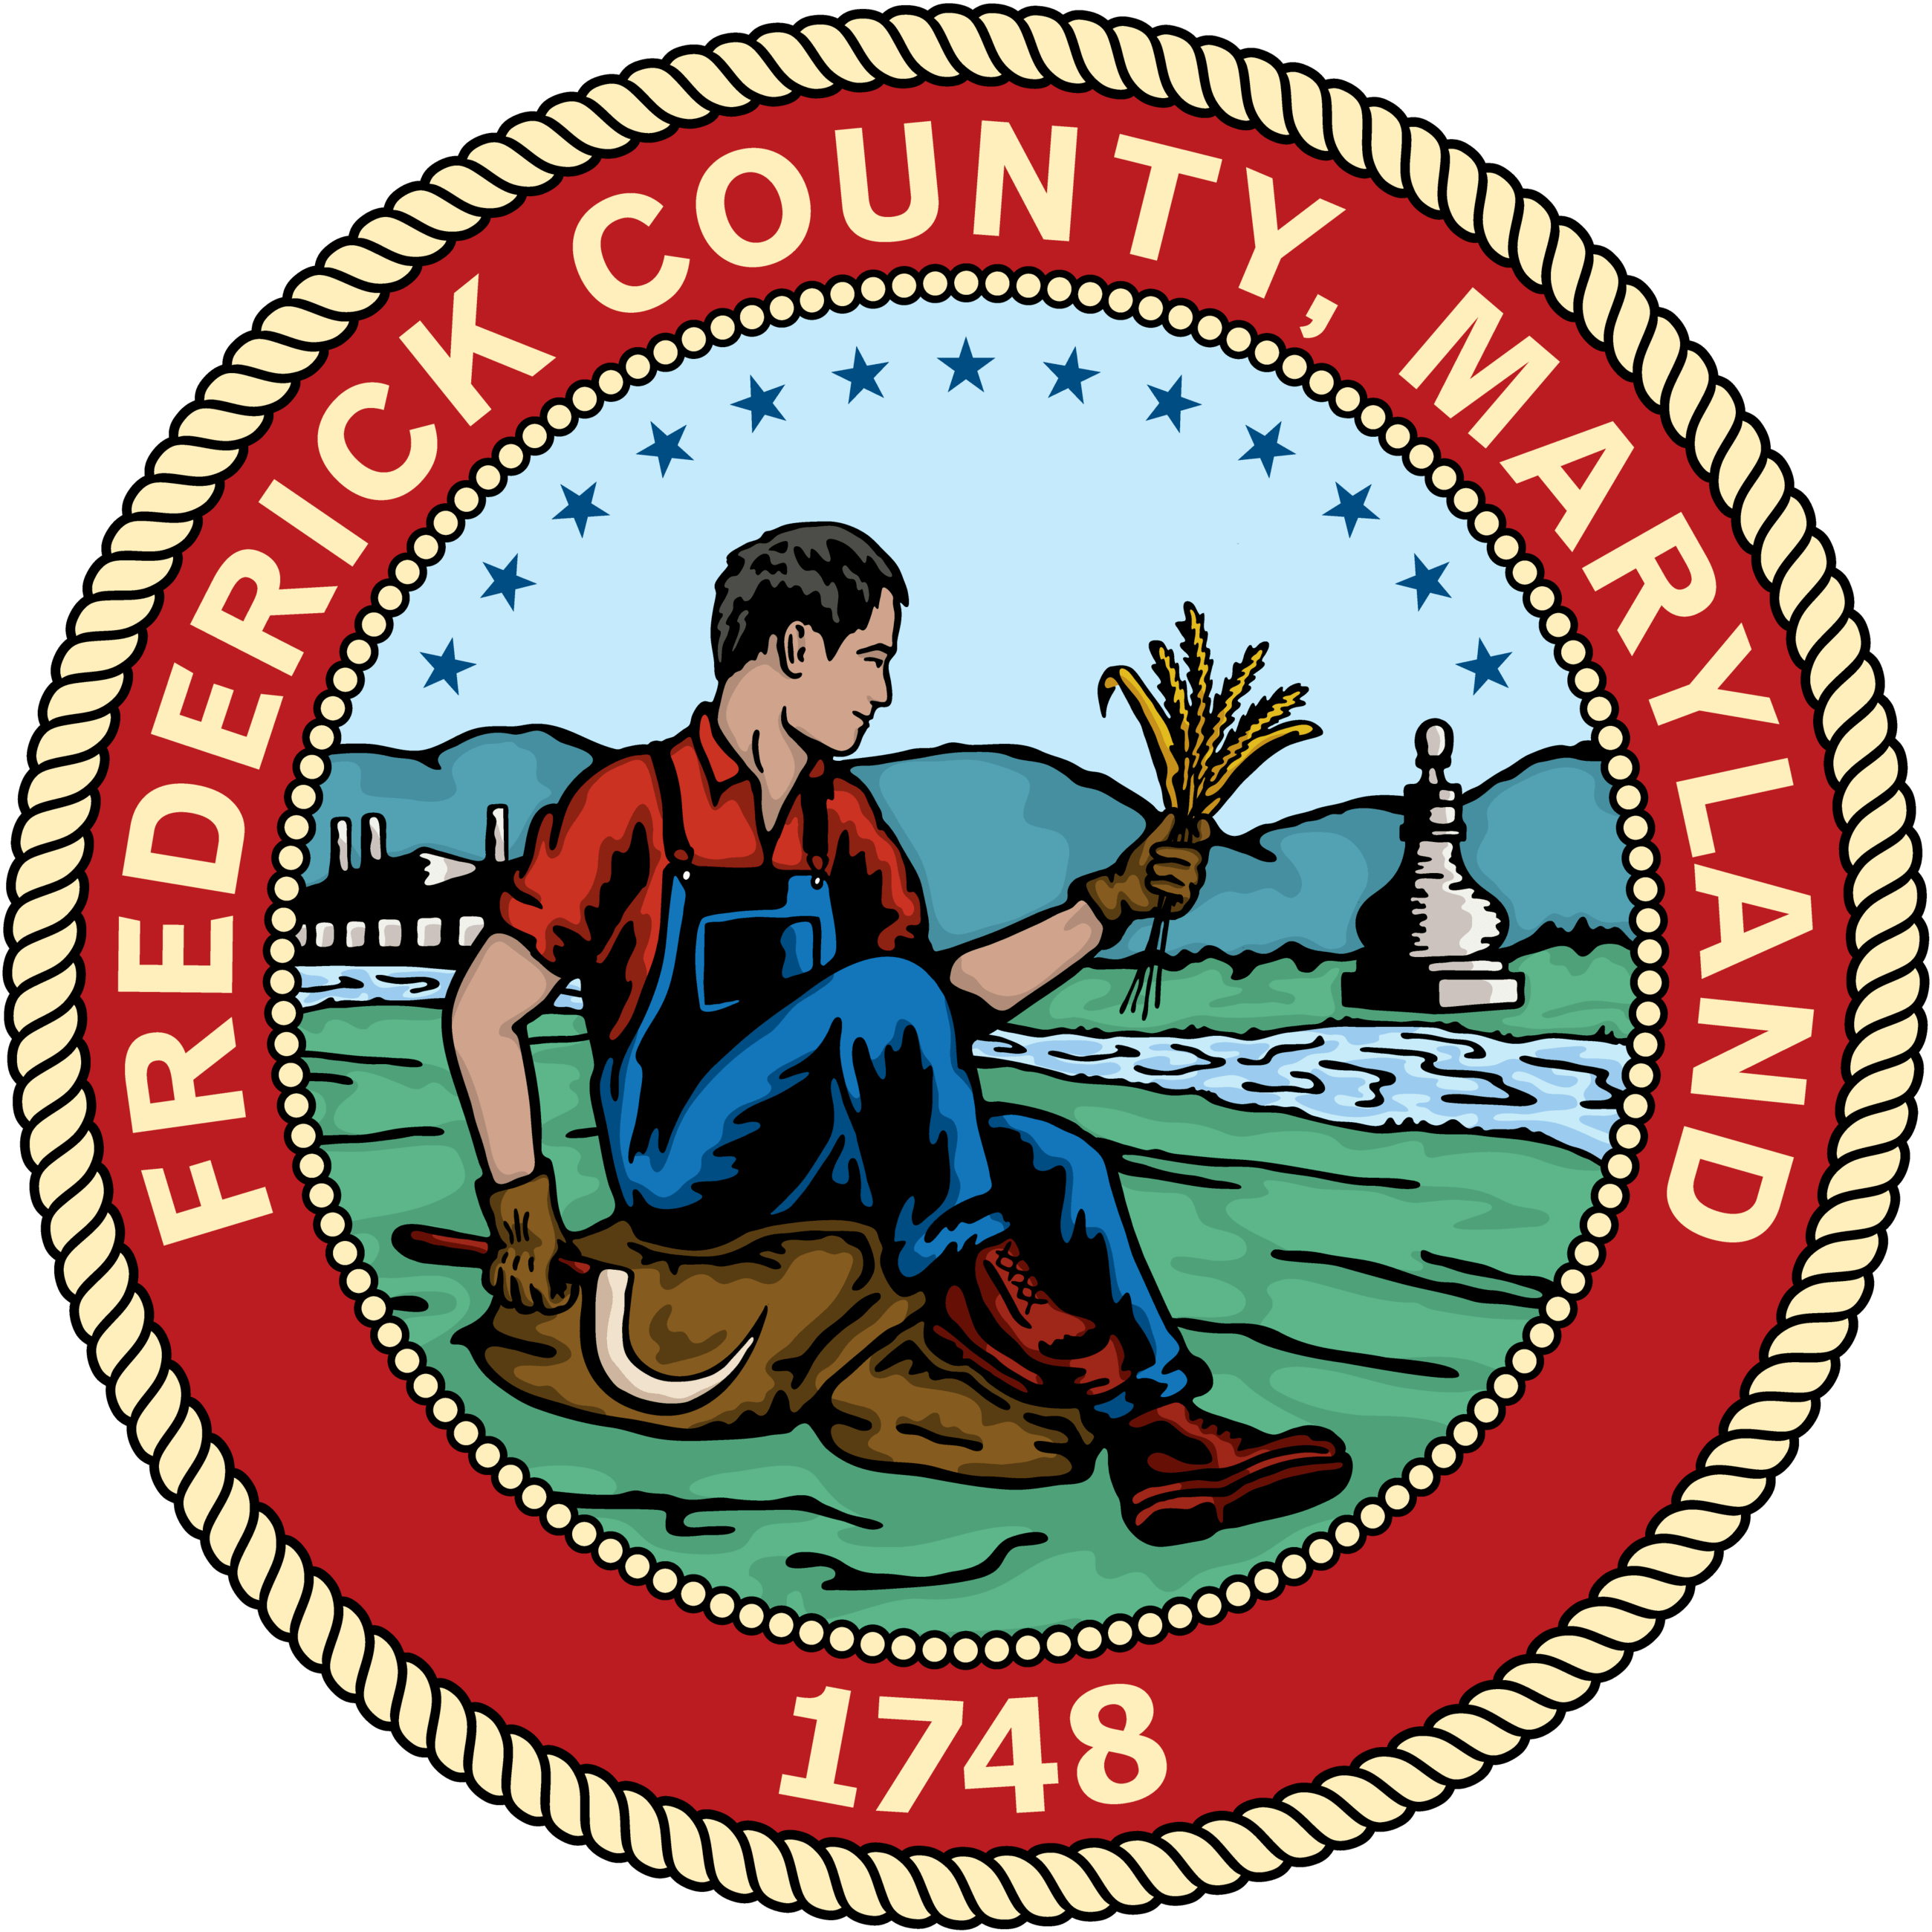 Majority Support Keeping Frederick County Property Tax Rate As Is